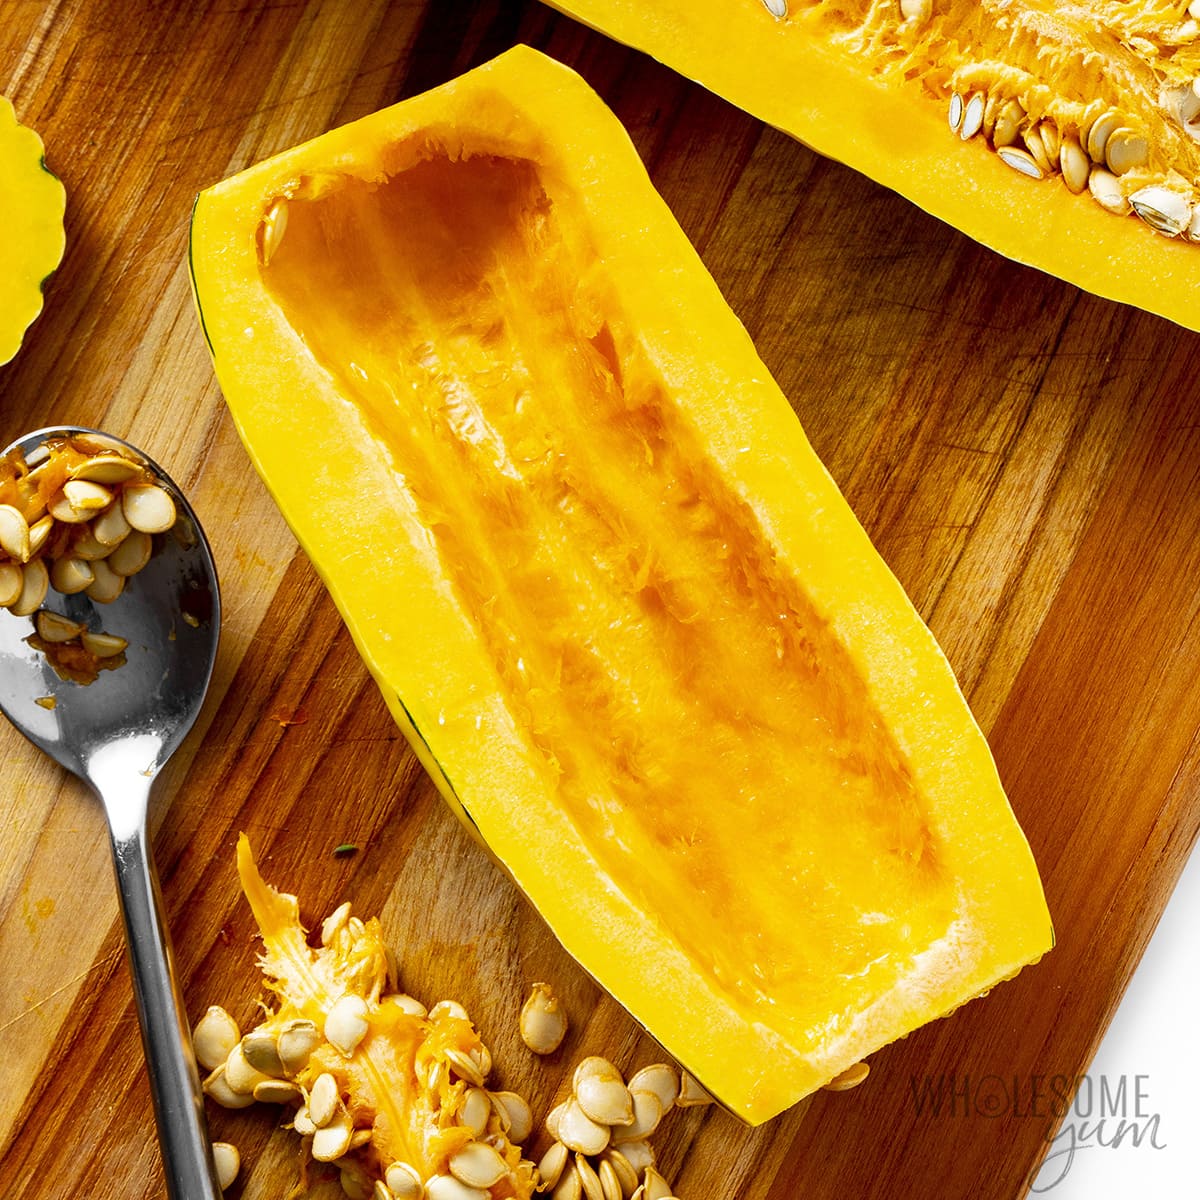 Cut delicata squash in half and scoop out seeds.